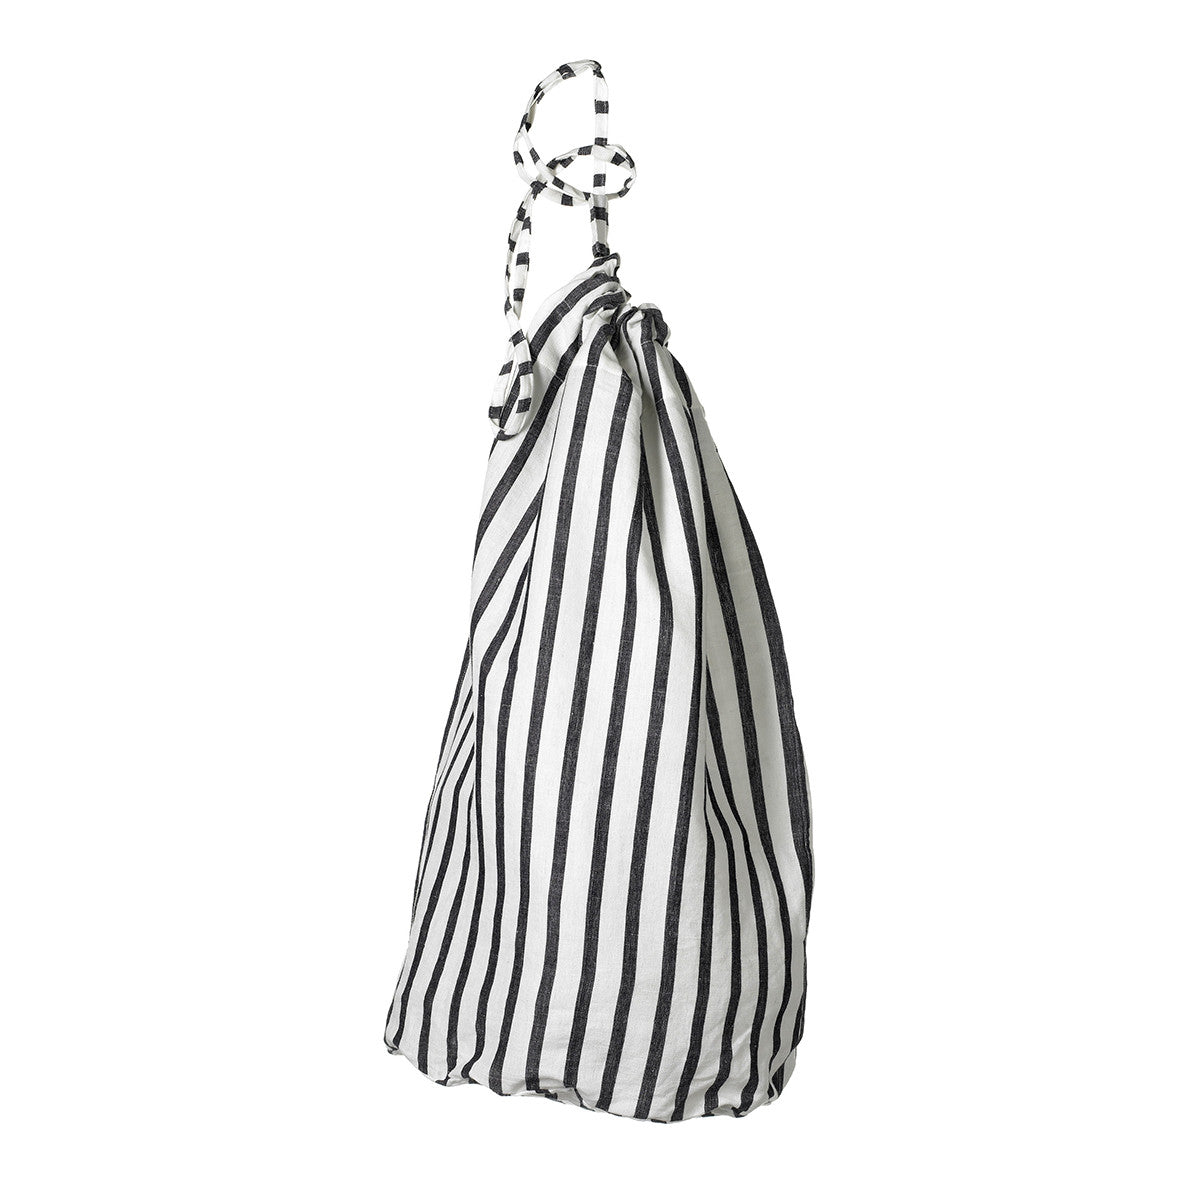 Autumn Ticking Stripe Linen Laundry and Storage Bags in Black ships from Canada (USA)